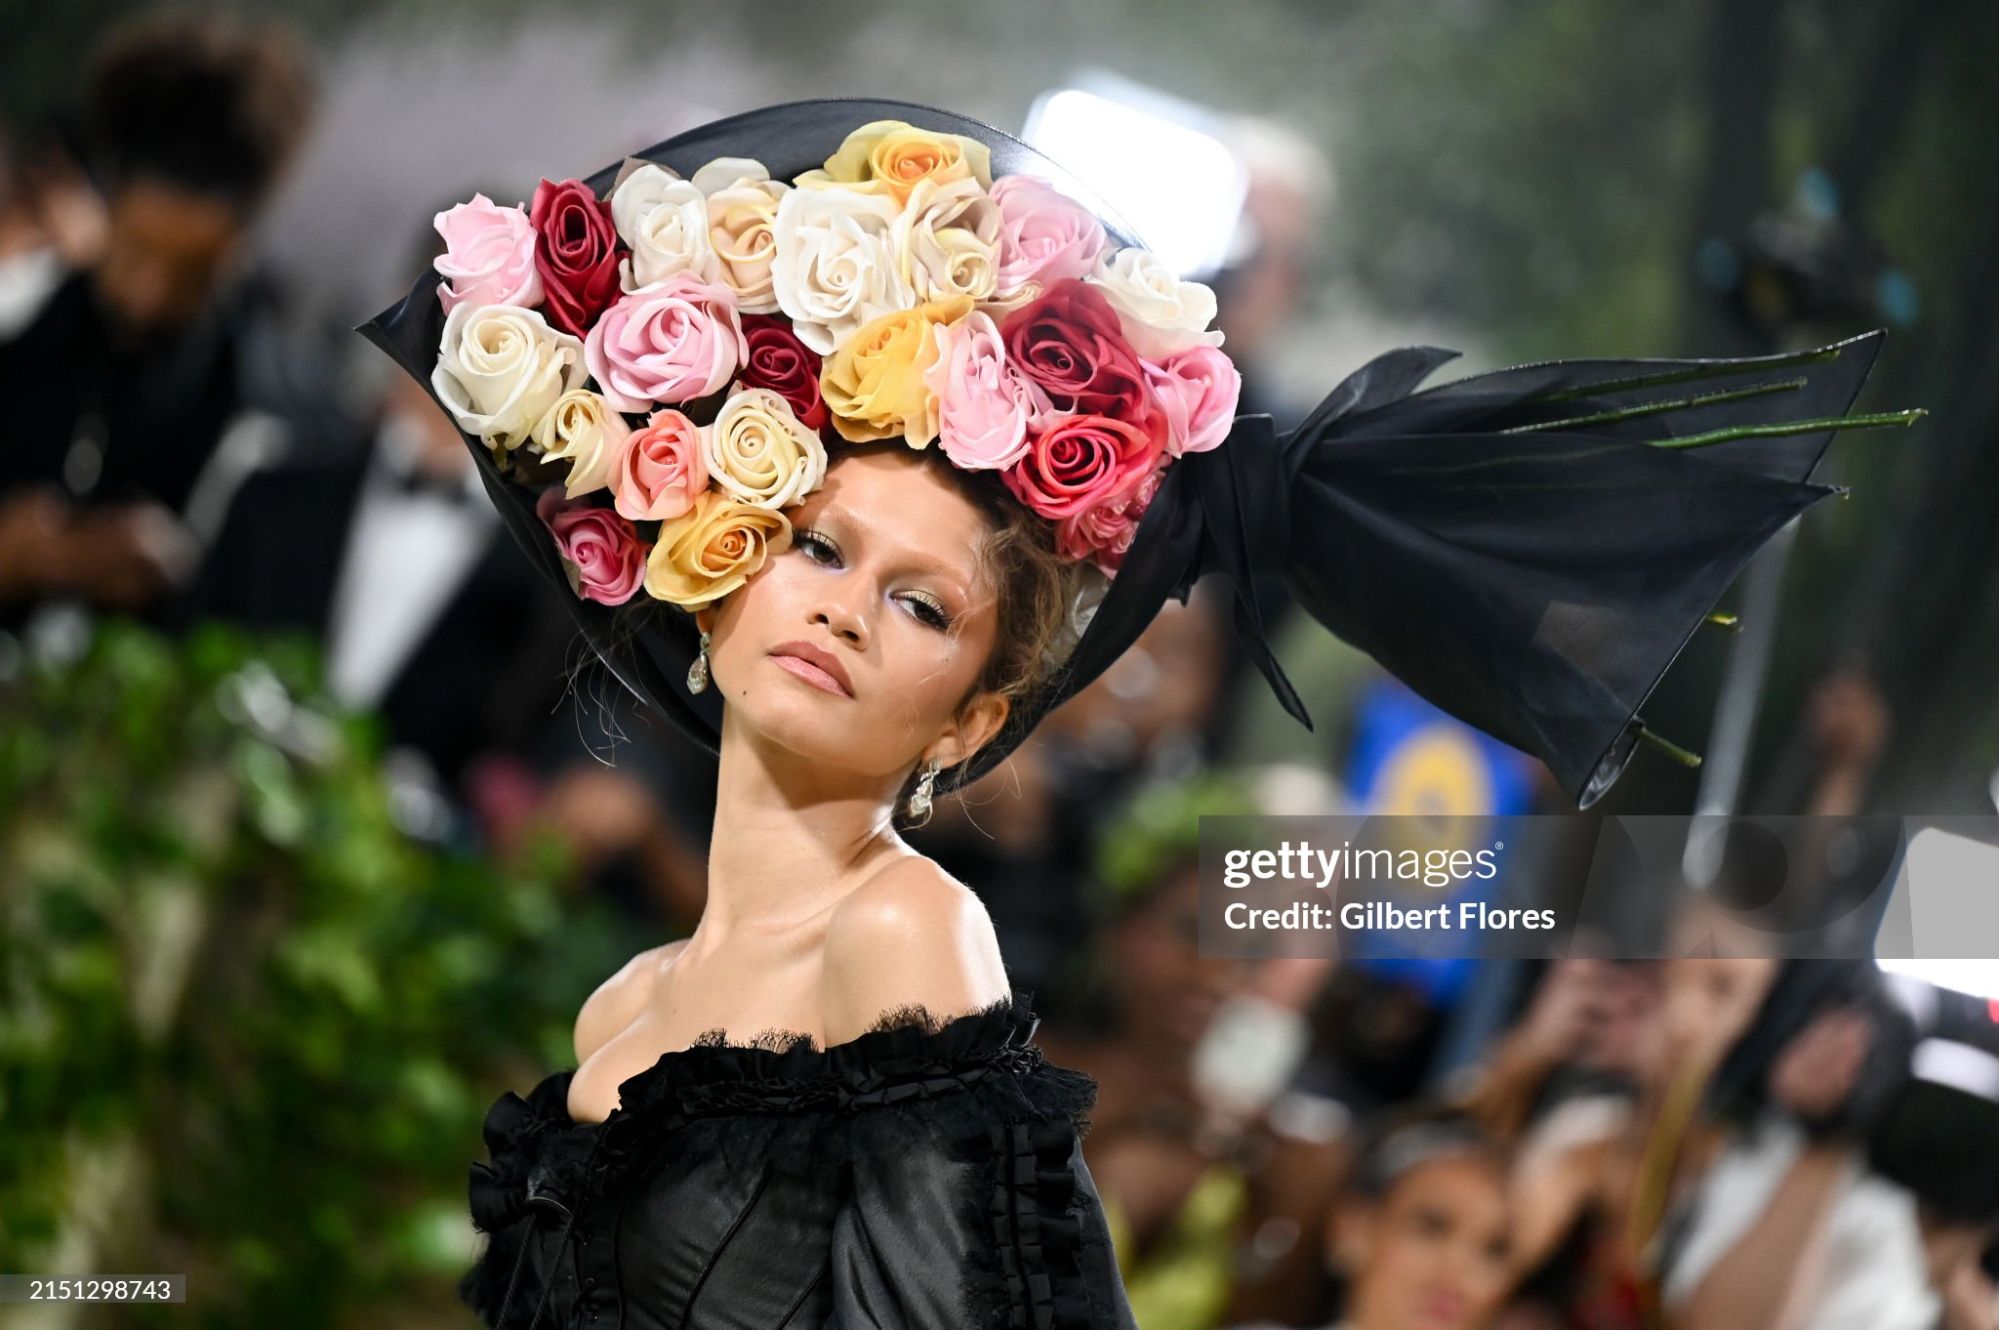 gettyimages-2151298743-2048x2048.jpg